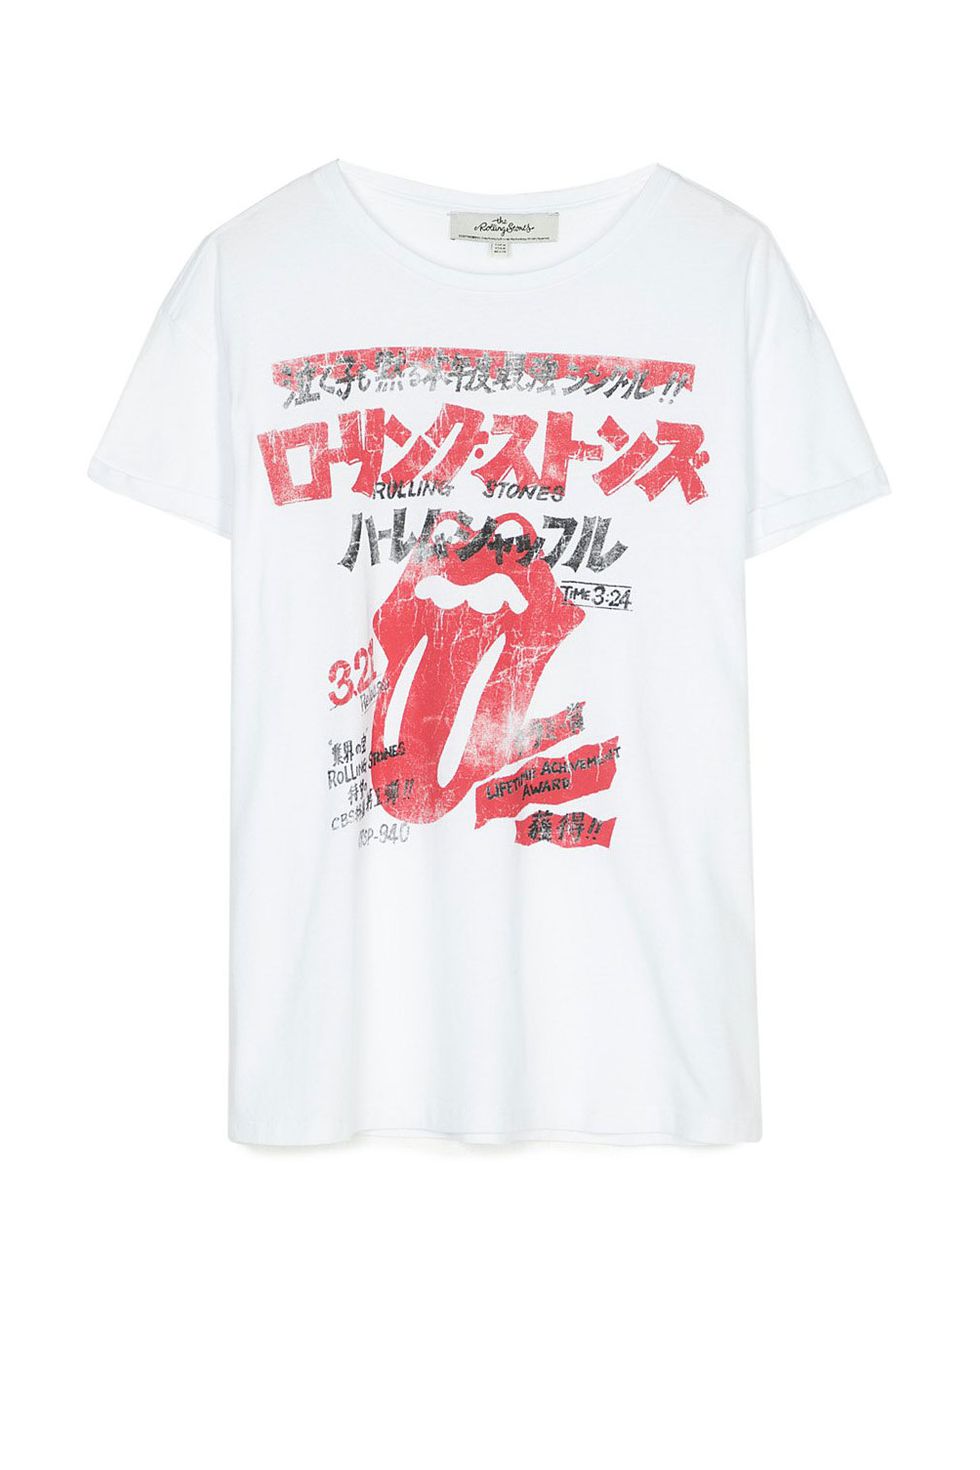 T-shirt, White, Clothing, Product, Sleeve, Active shirt, Red, Text, Top, Font, 